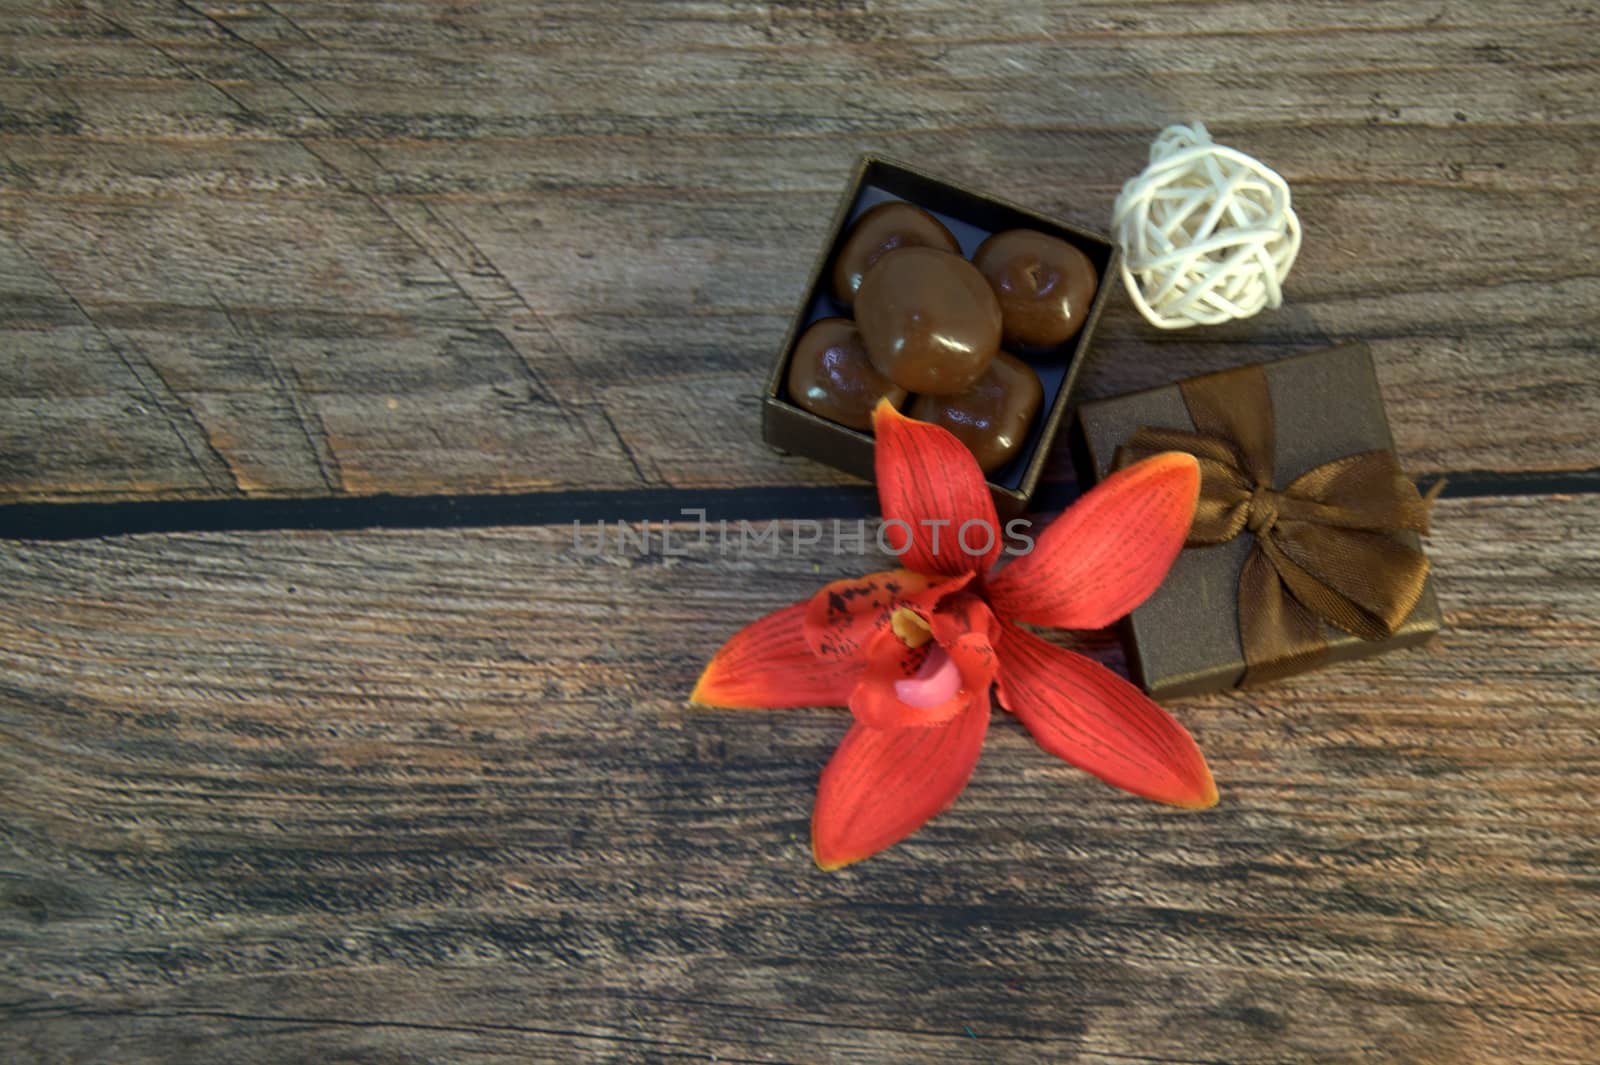 A box of chocolates, decorative balls, a bud of red orchid on a wooden table. Close-up.